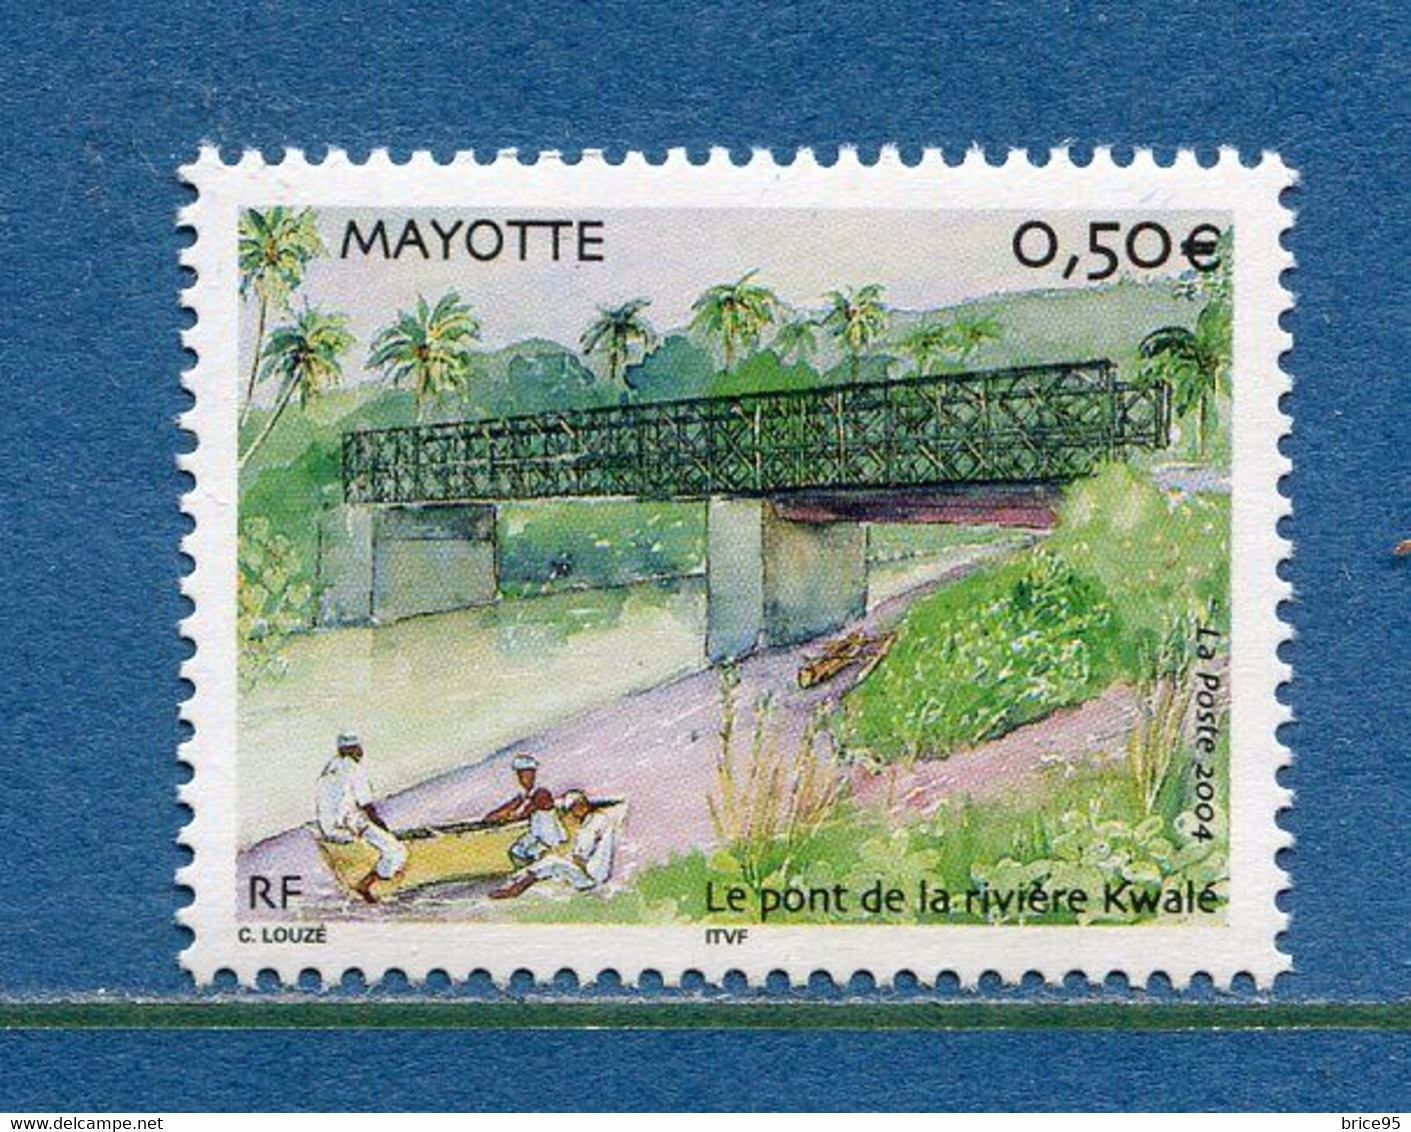 Mayotte - YT N° 166 ** - Neuf Sans Charnière - 2004 - Unused Stamps